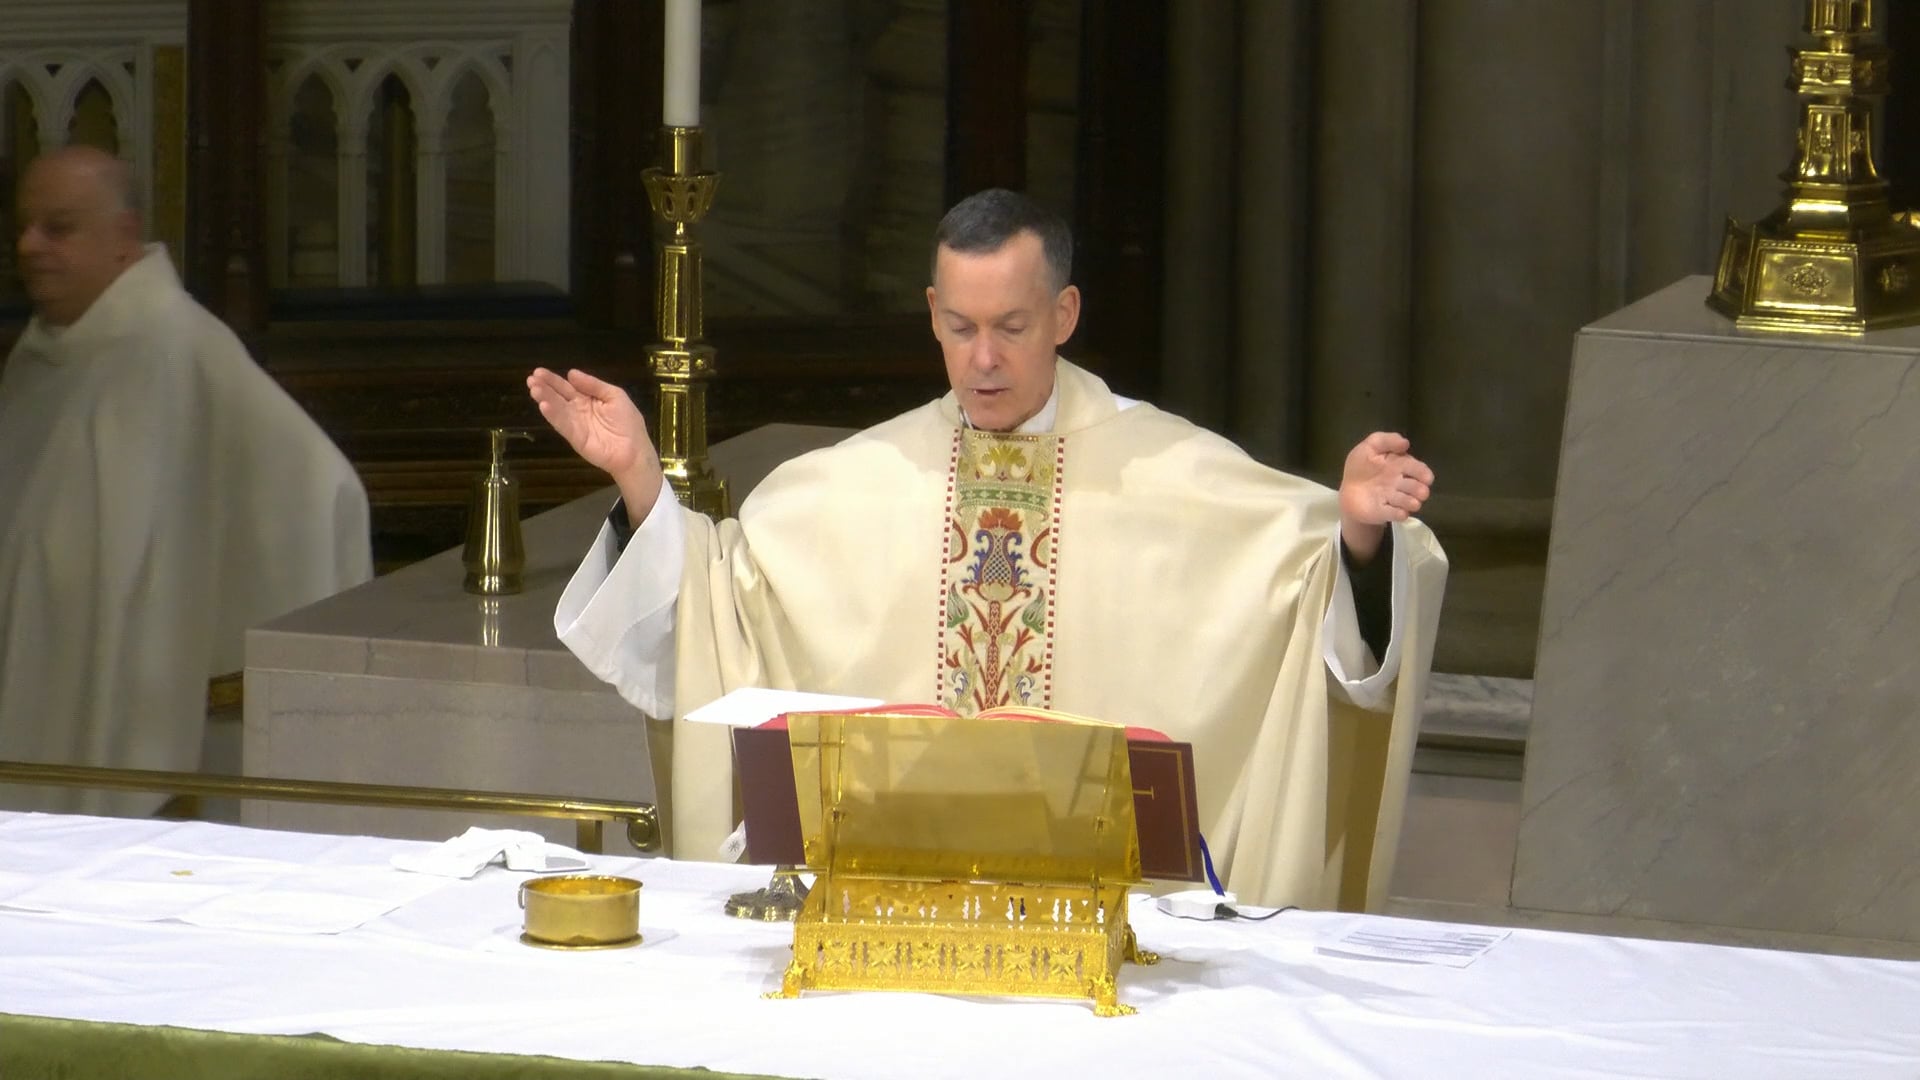 Mass from St. Patrick's Cathedral - January 26, 2023